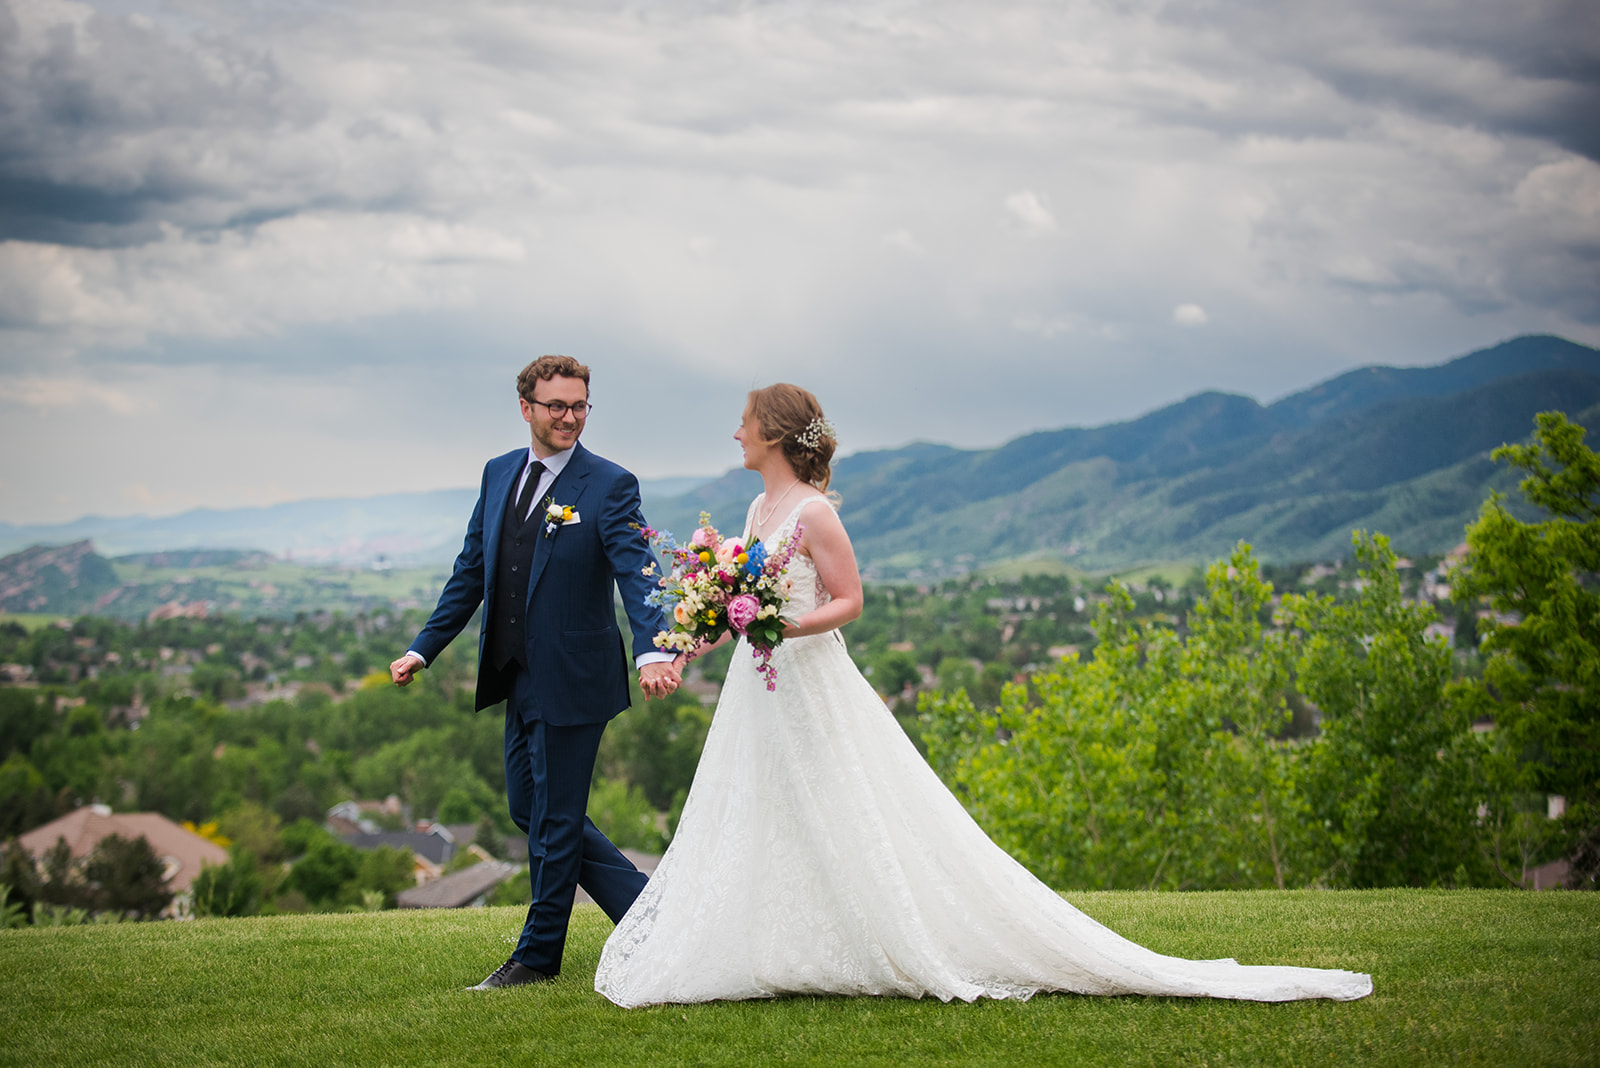 Groom leads bride across a field with scenic Colorado landscape in the background.